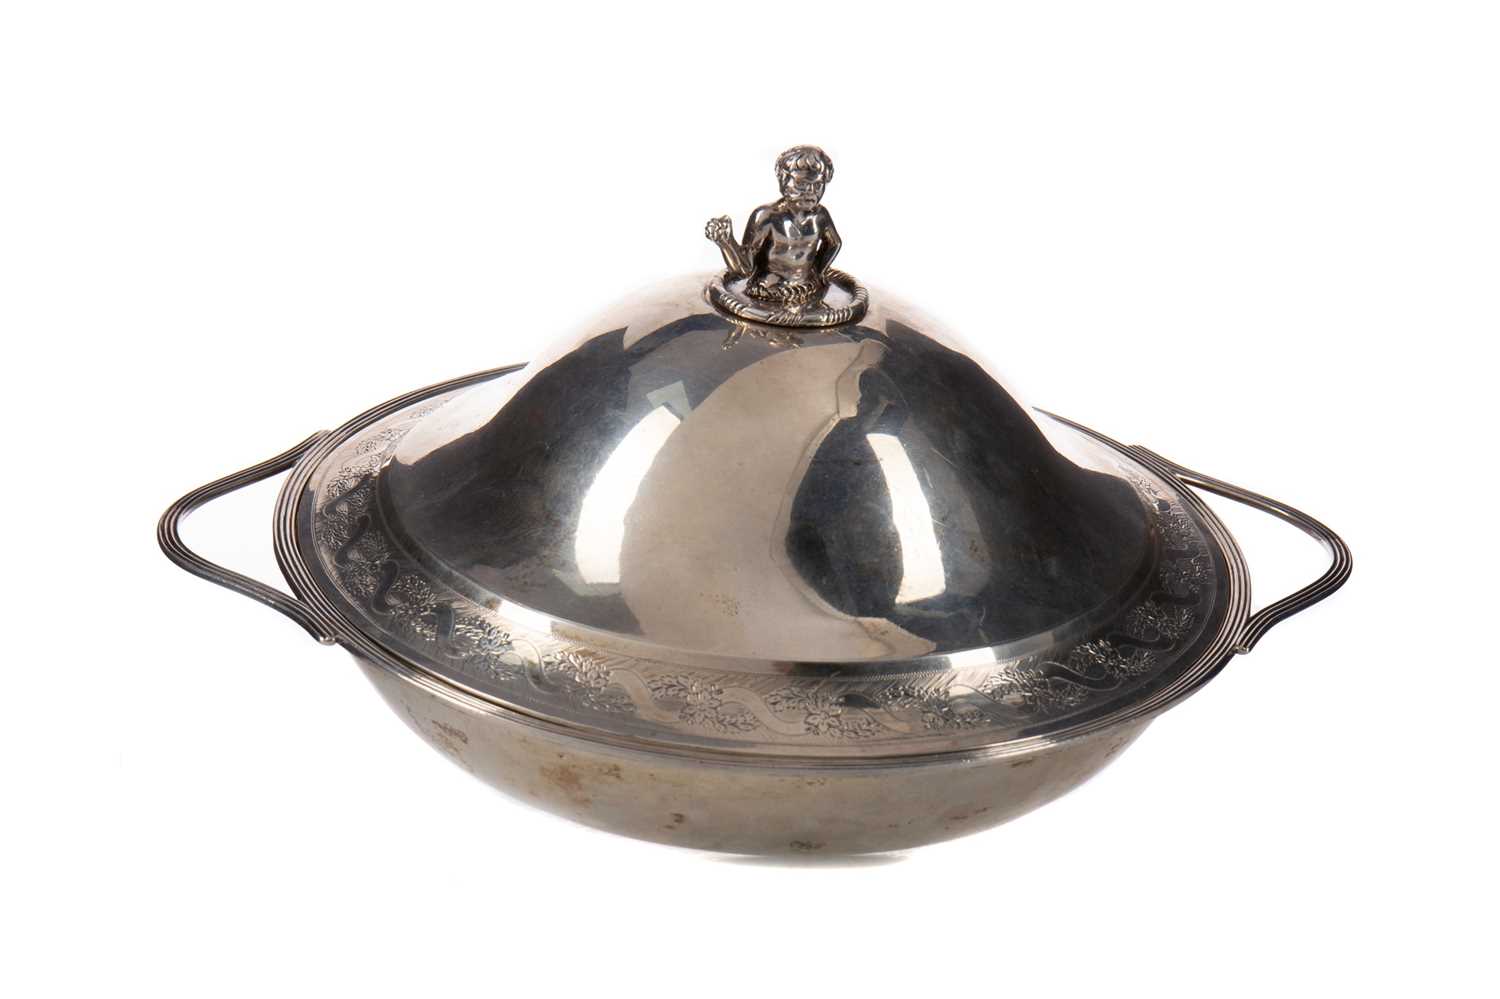 A GEORGE III SCOTTISH SILVER ENTREE DISH AND COVER